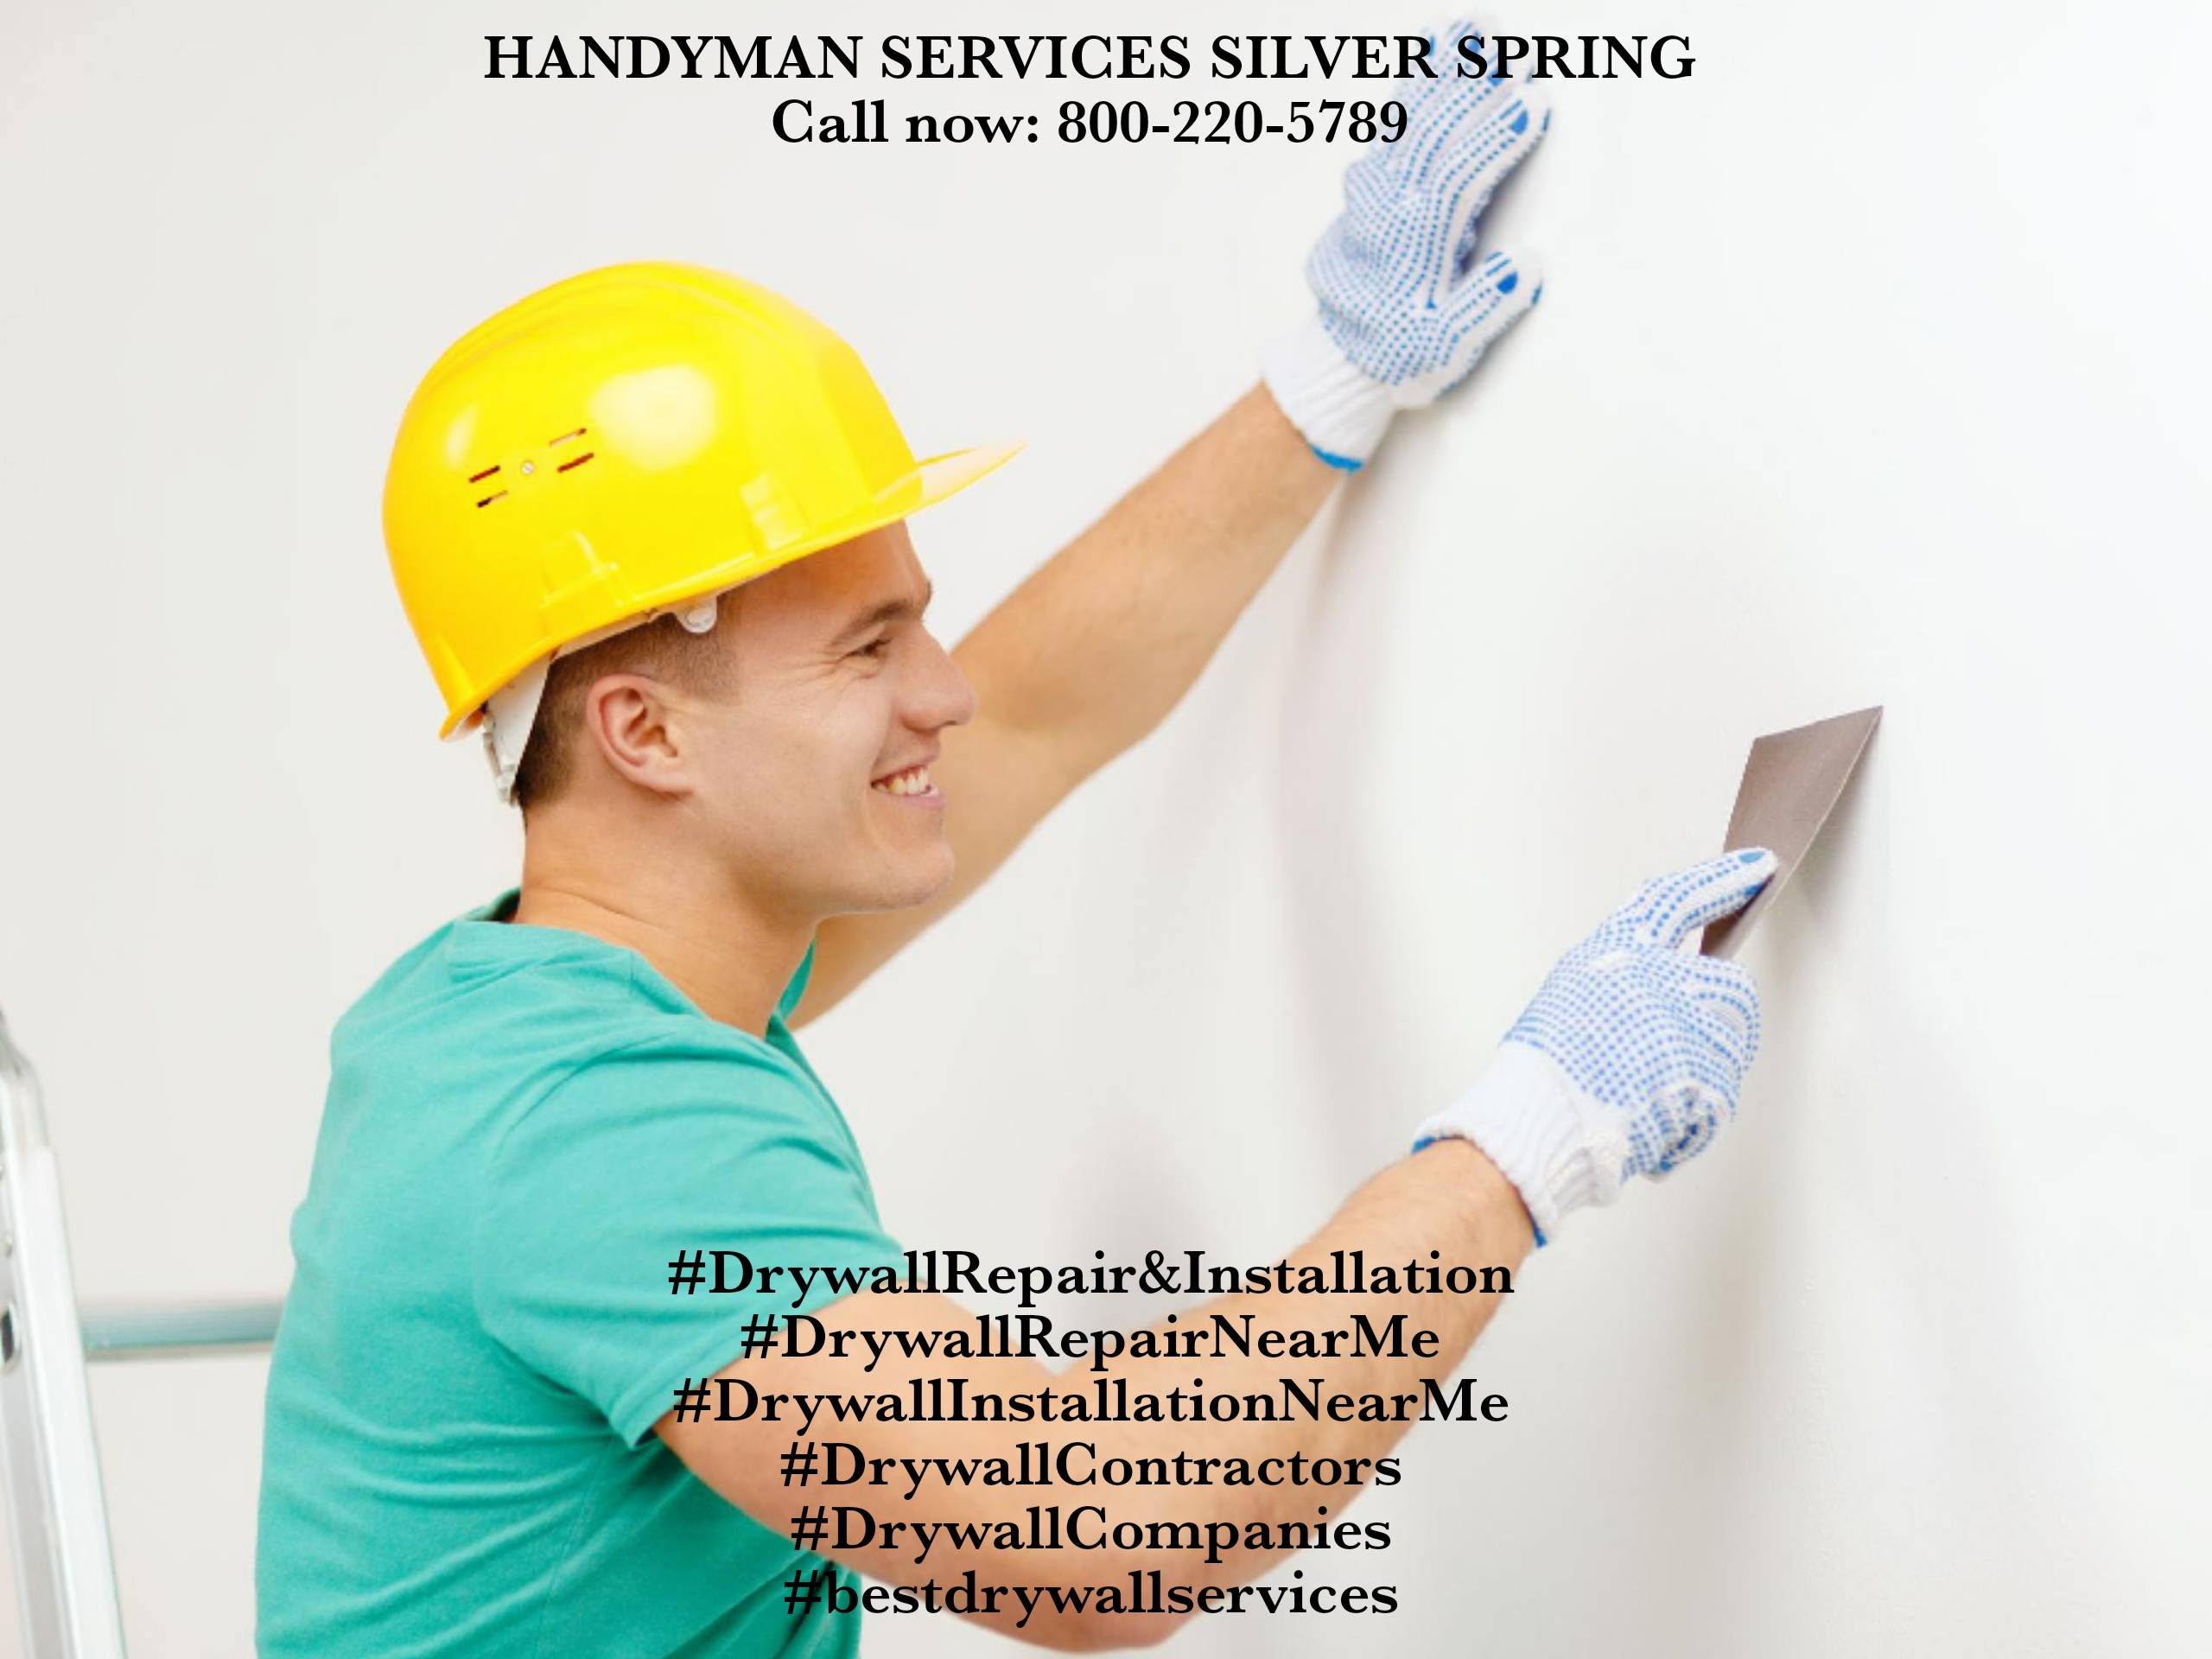  Enhance Your Property with Professional Drywall Services